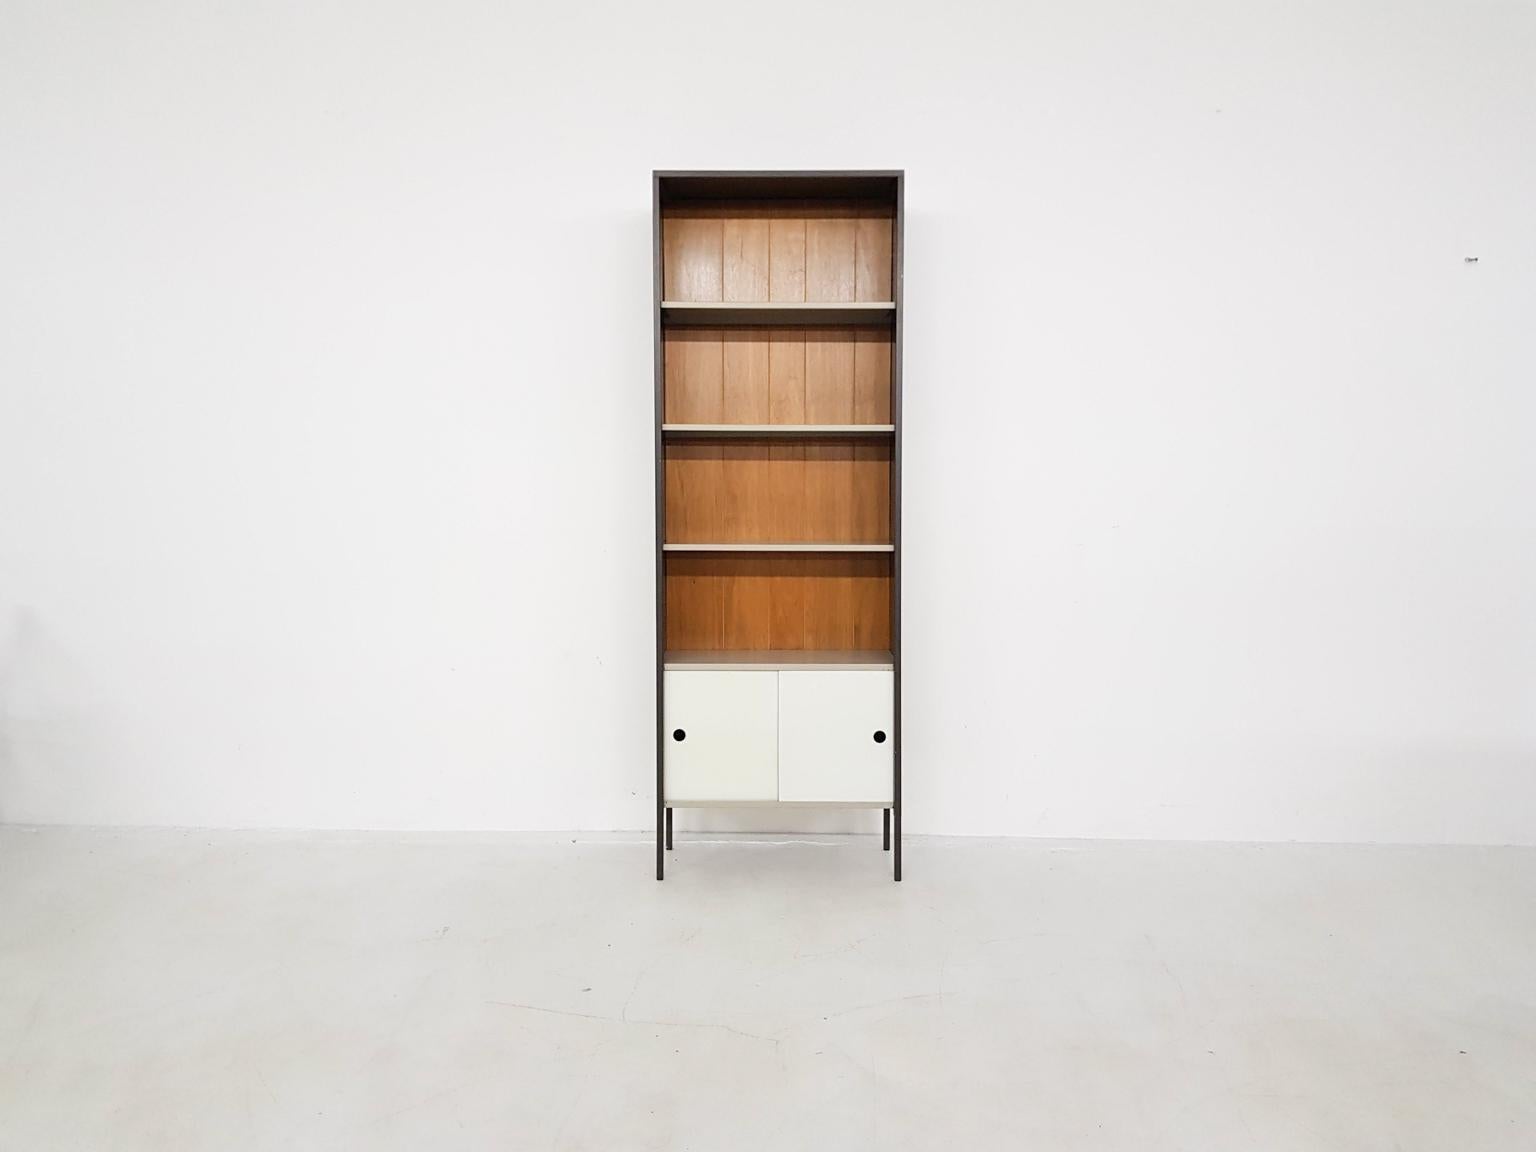 Elegant bookcase with a cabinet at the bottom by Dutch mid-century designer Coen de Vries. Made by Pilastro the Netherlands in the 1960s.

Metal industrial bookcases and shelving systems are among the most known items from the Dutch midcentury.